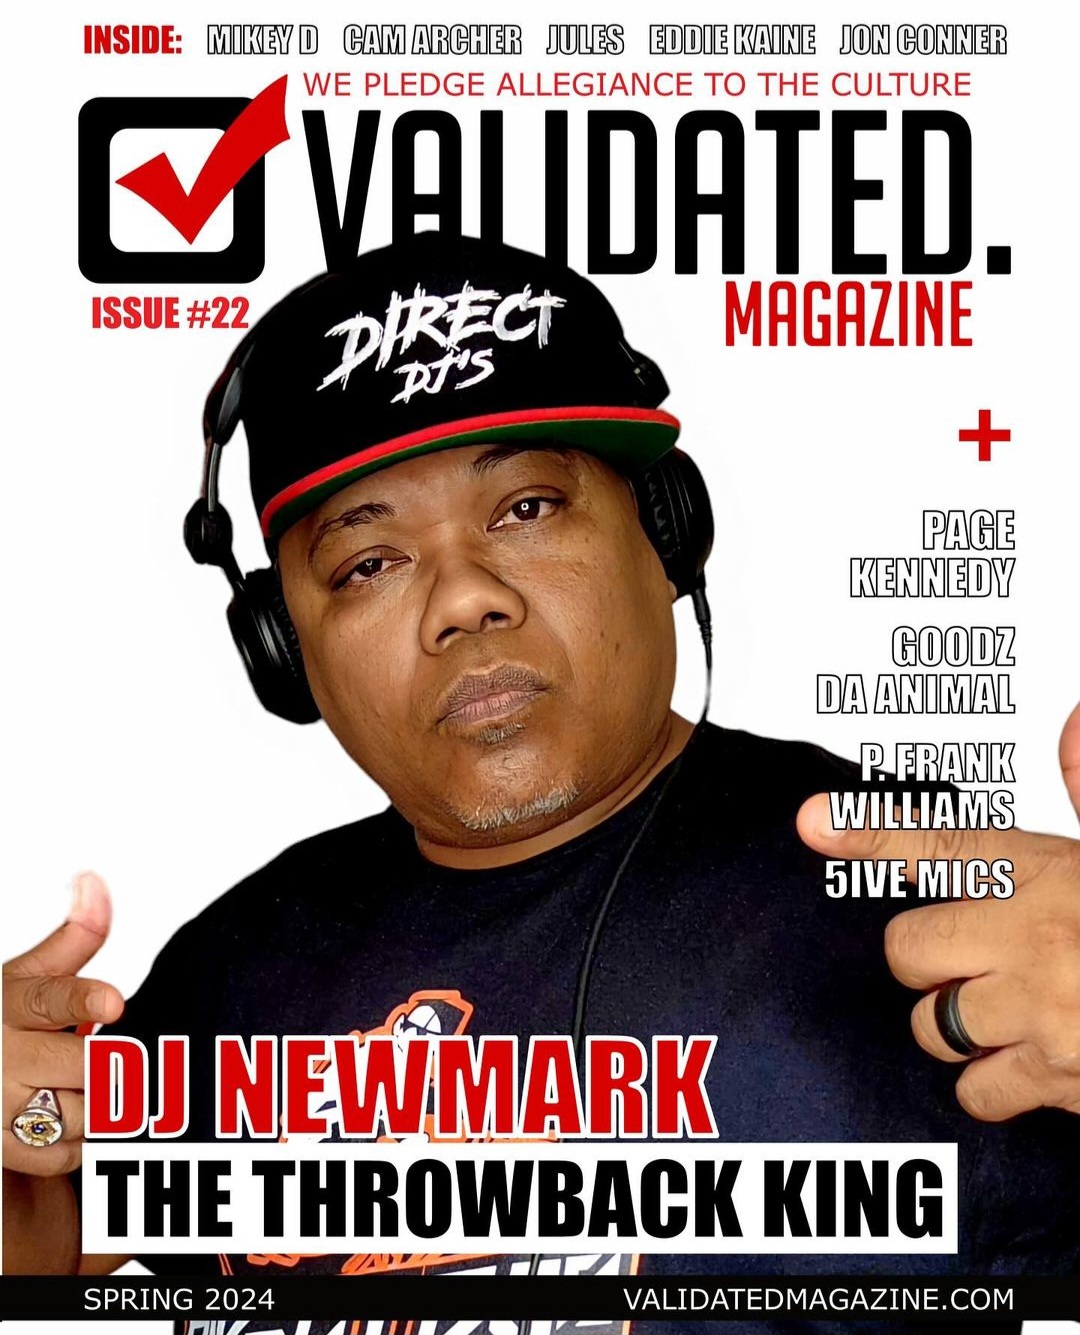 DJ Newmark: The Legendary Throwback King Graces the Cover of Validated Magazine